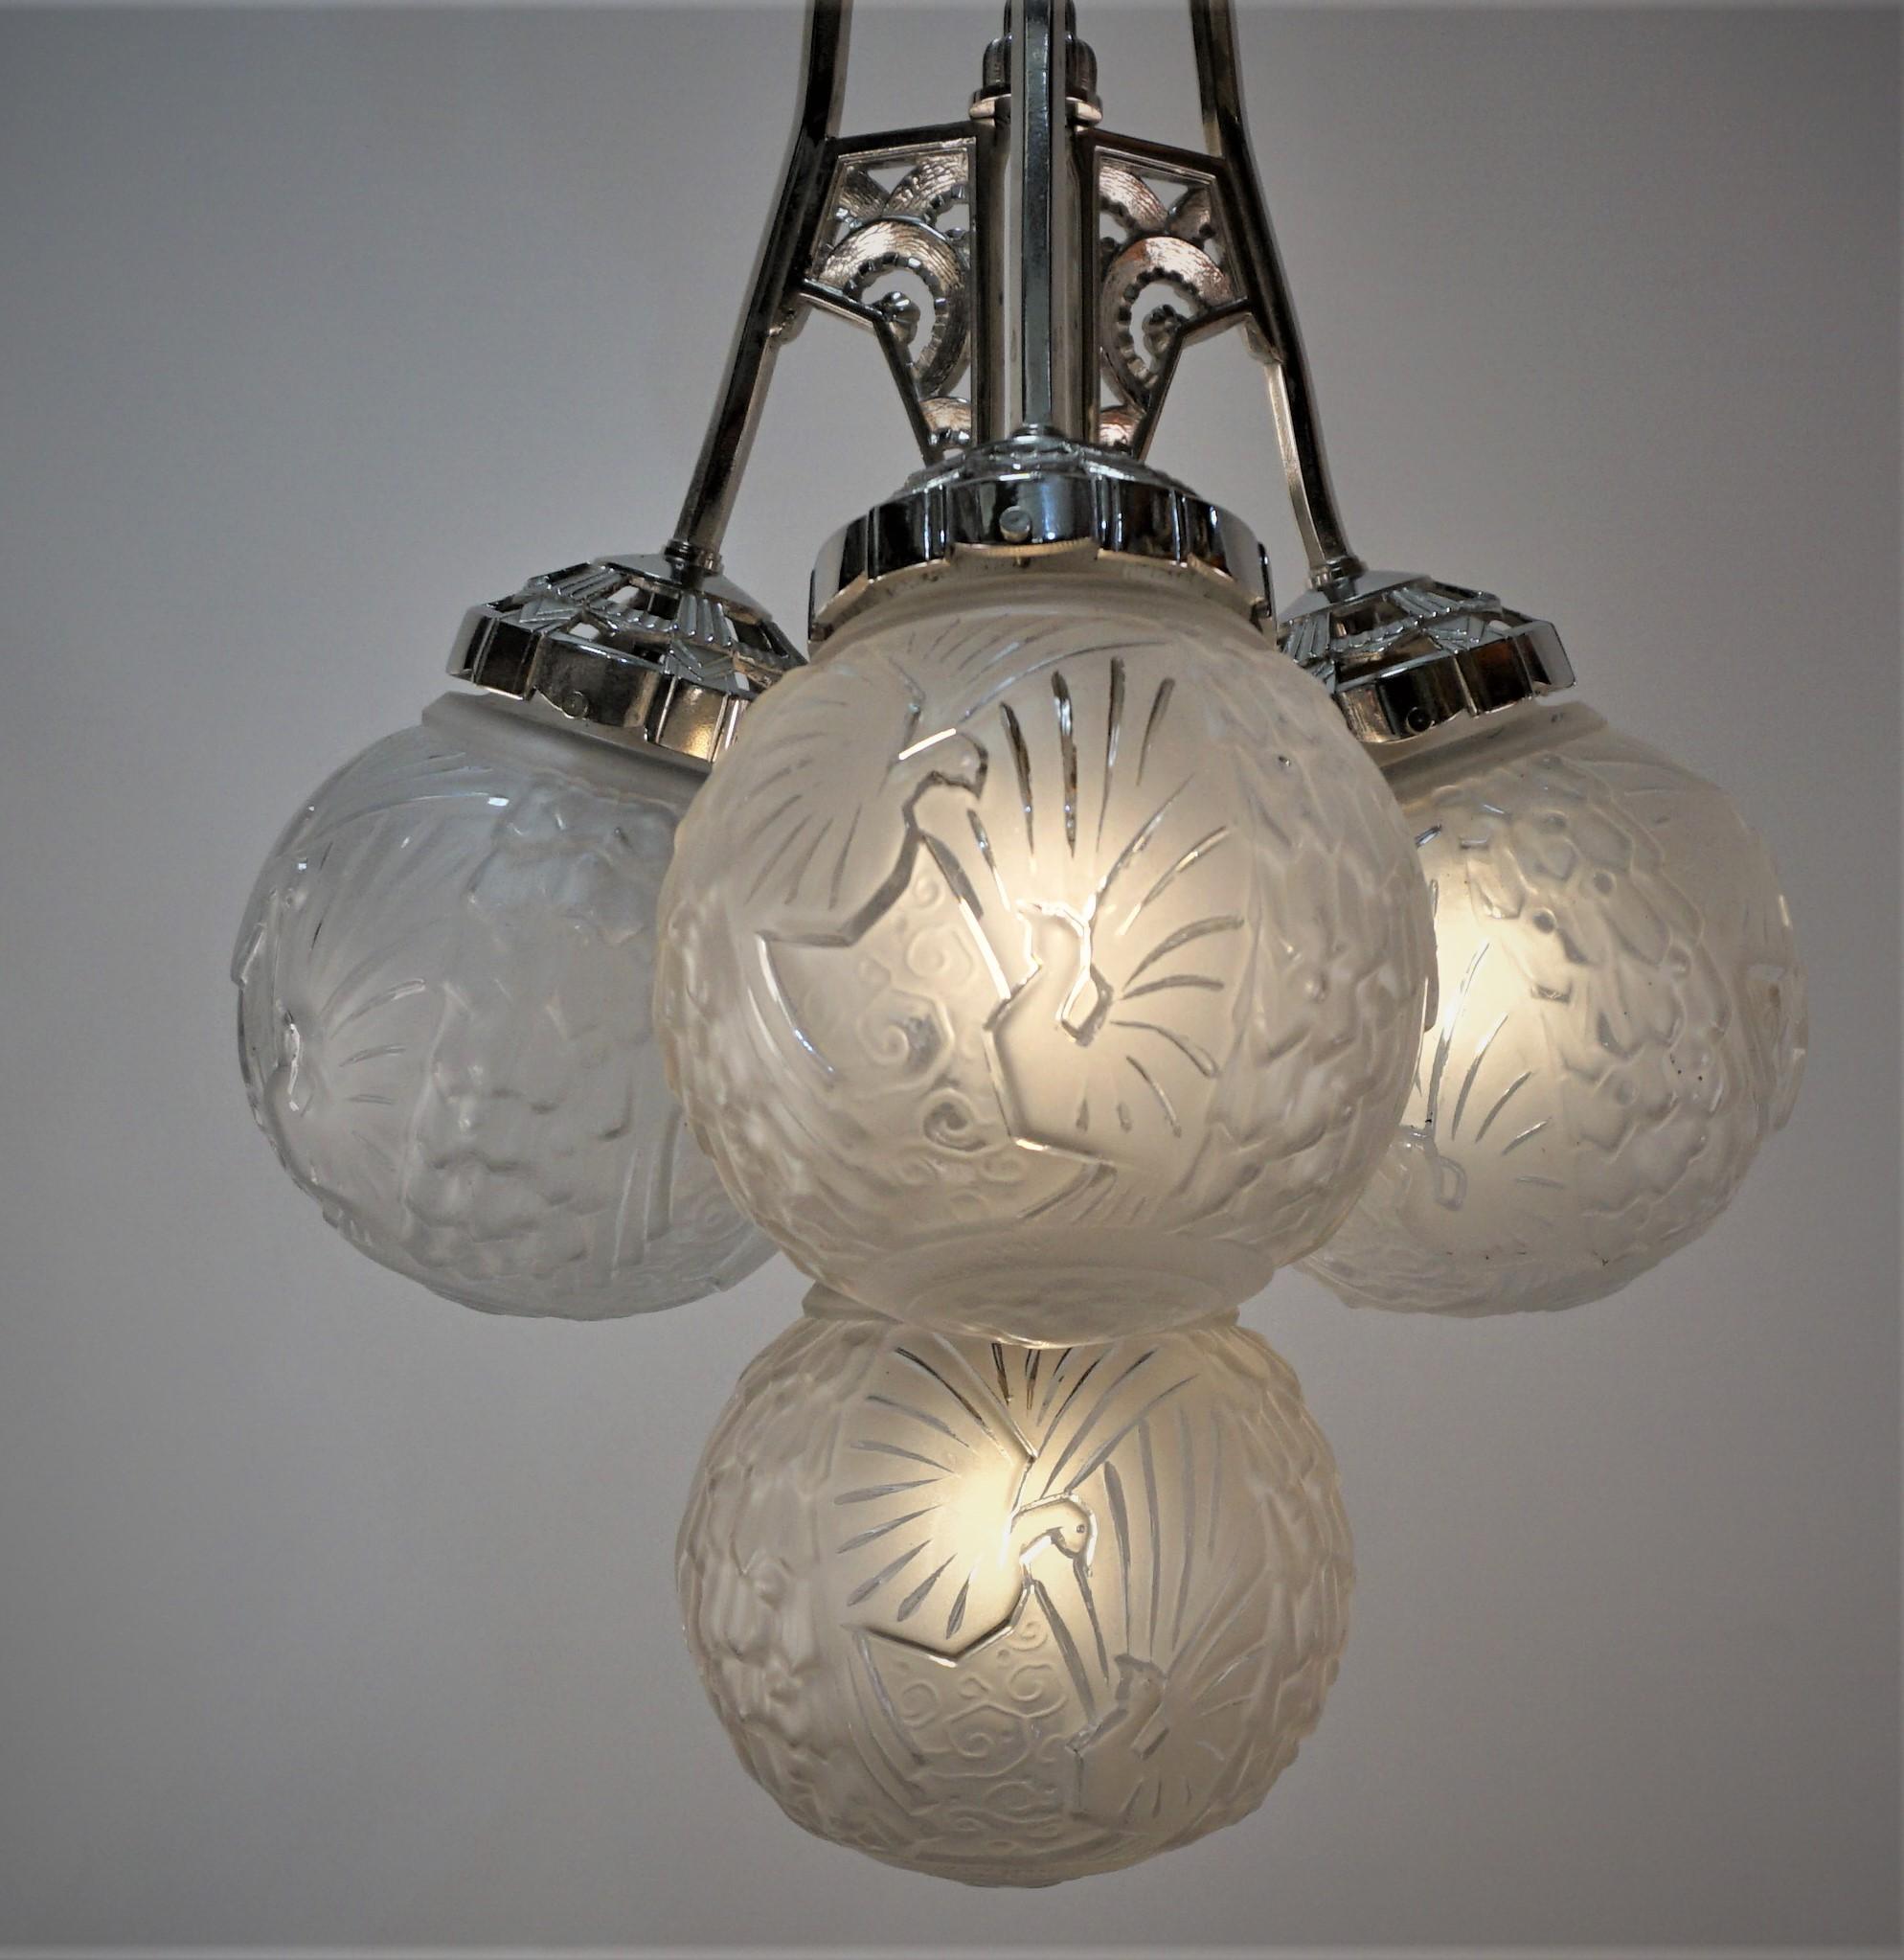 Roud geometric glass globes with etched peacocks and beautiful polished nickel on bronze frame.
Four lights 100 watts light bulbs (included)
Professionally rewired and ready for installation.